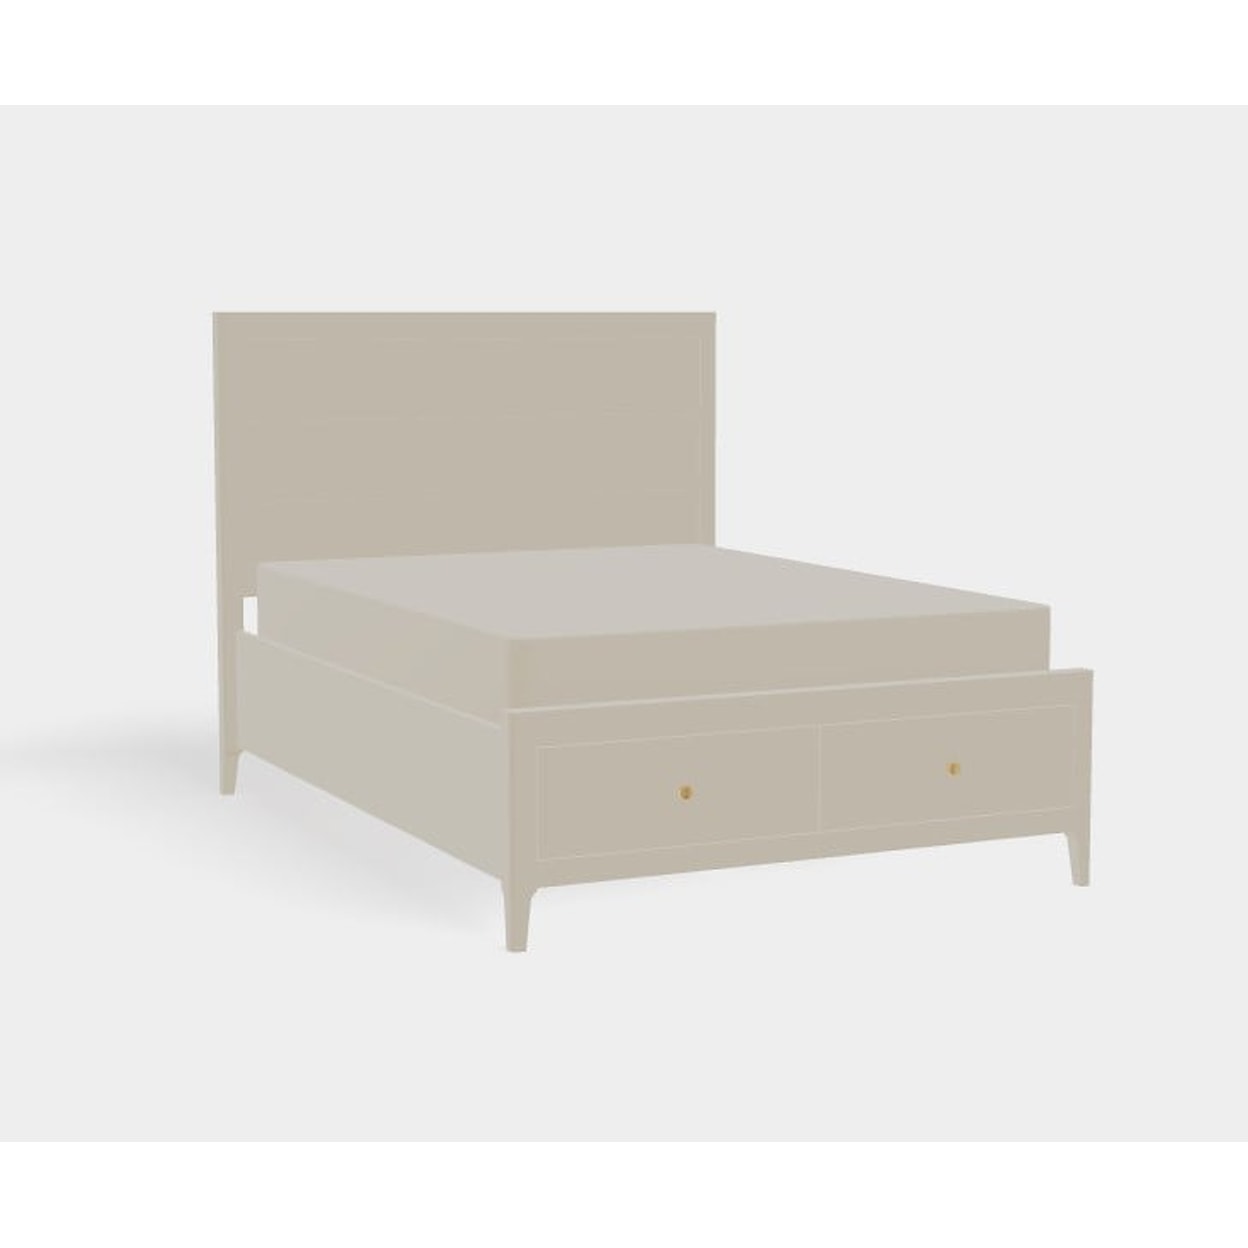 Mavin Toulon Toulon Queen Footboard Storage Uph Bed